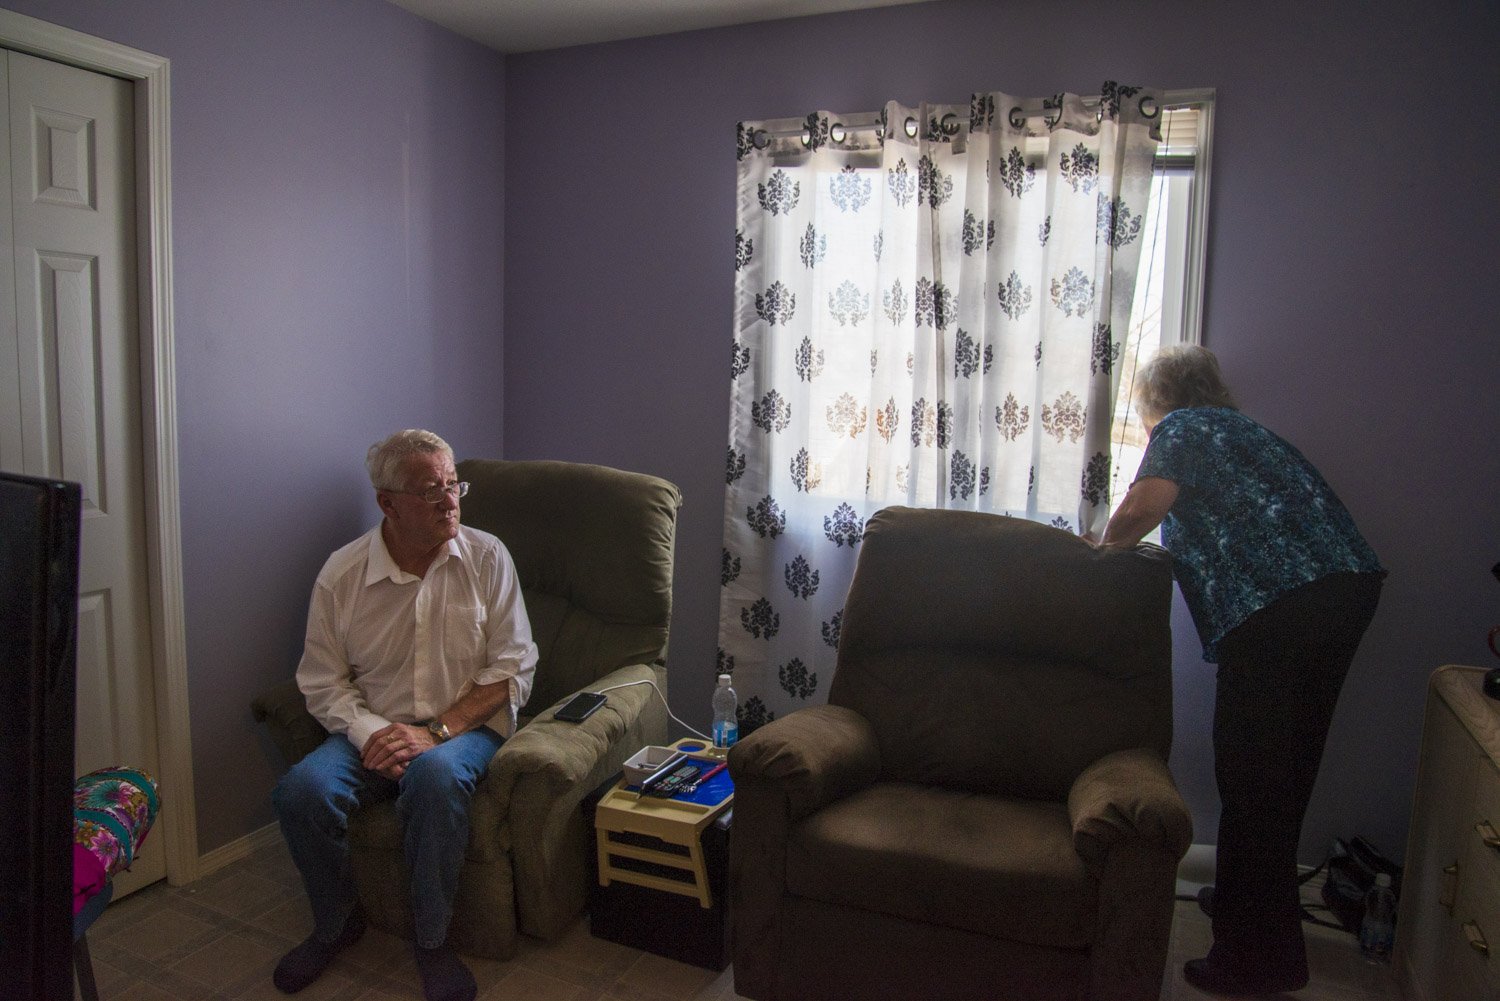  Benita and Gary in their room at the Elder’s Caring Shelter in Grande Prairie. “We thrive at keeping the place healthy and positive: we can increase the chance of people healing. For me to see one of the resident go is like seeing one of your child 